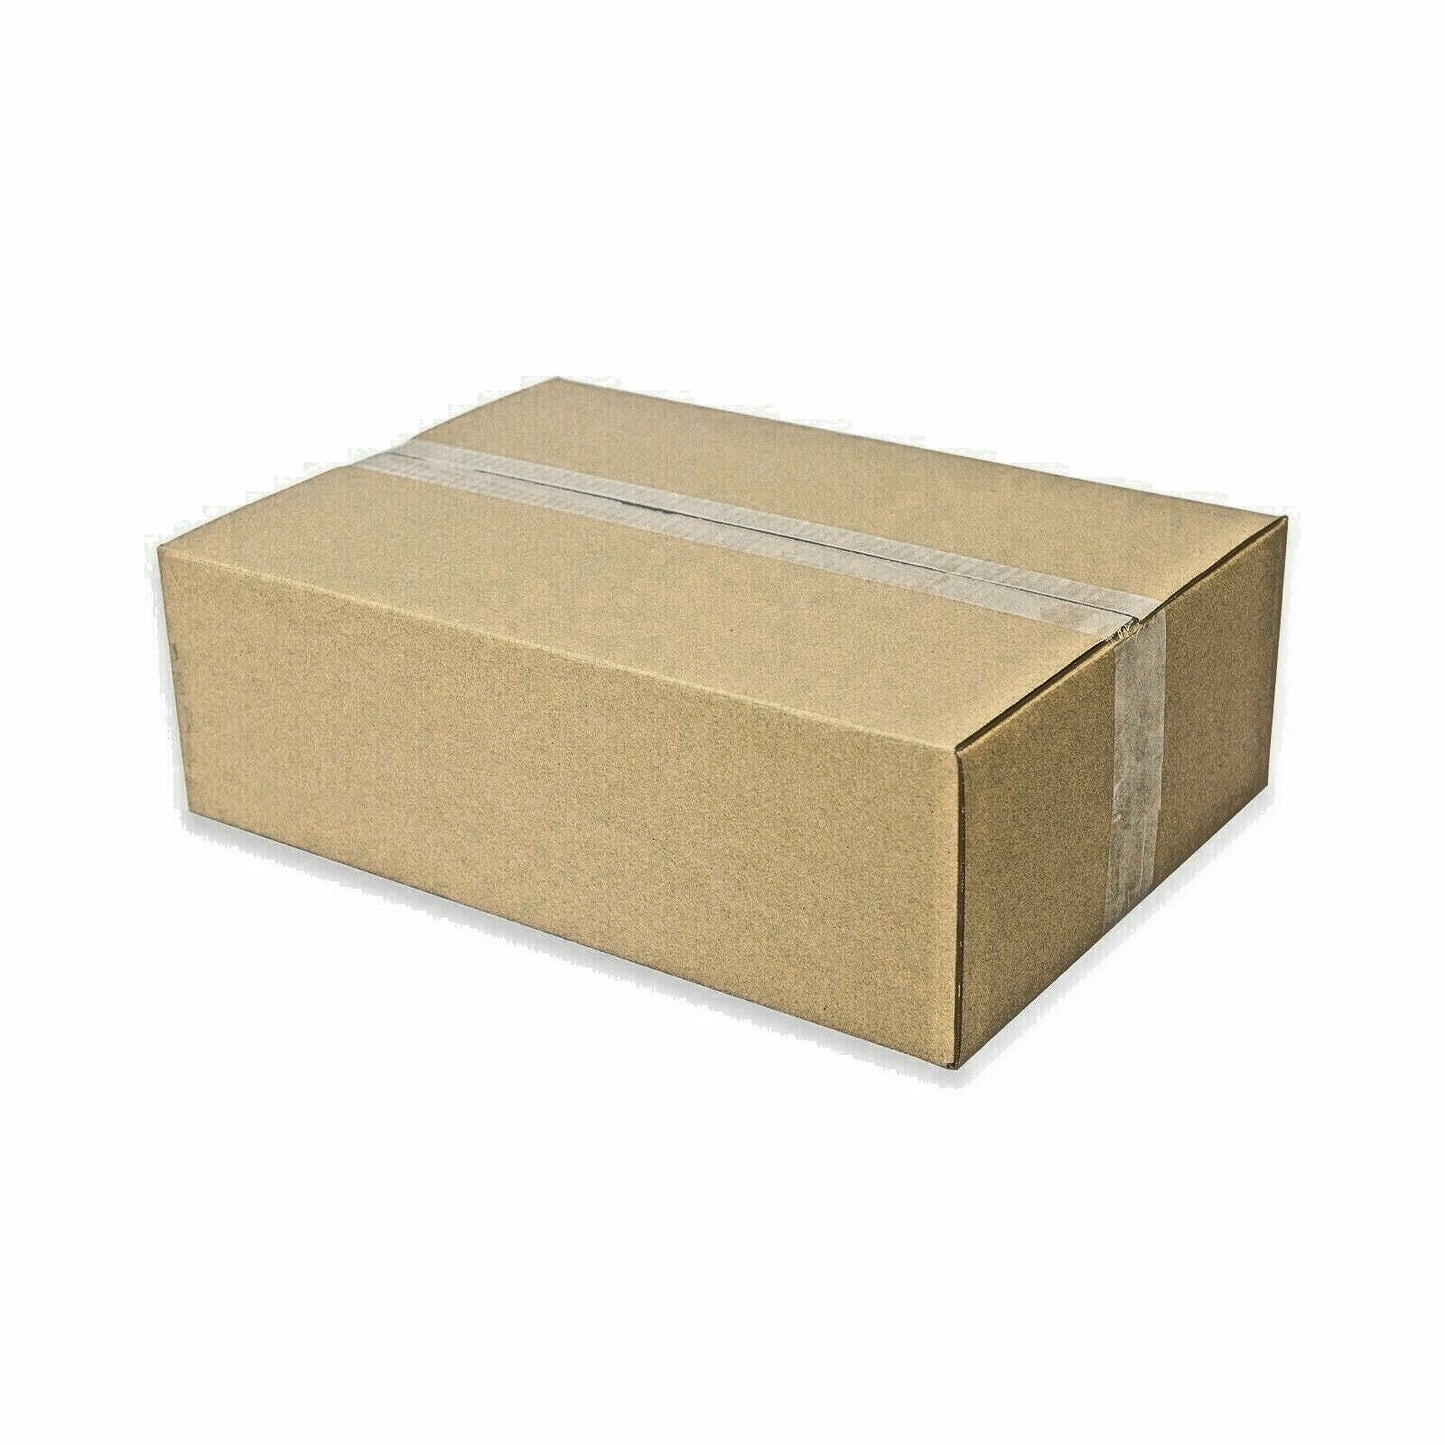 A3 Mailing Box 470 x 350 x 120mm Regular Shipping Carton 100% Recycled AU Made